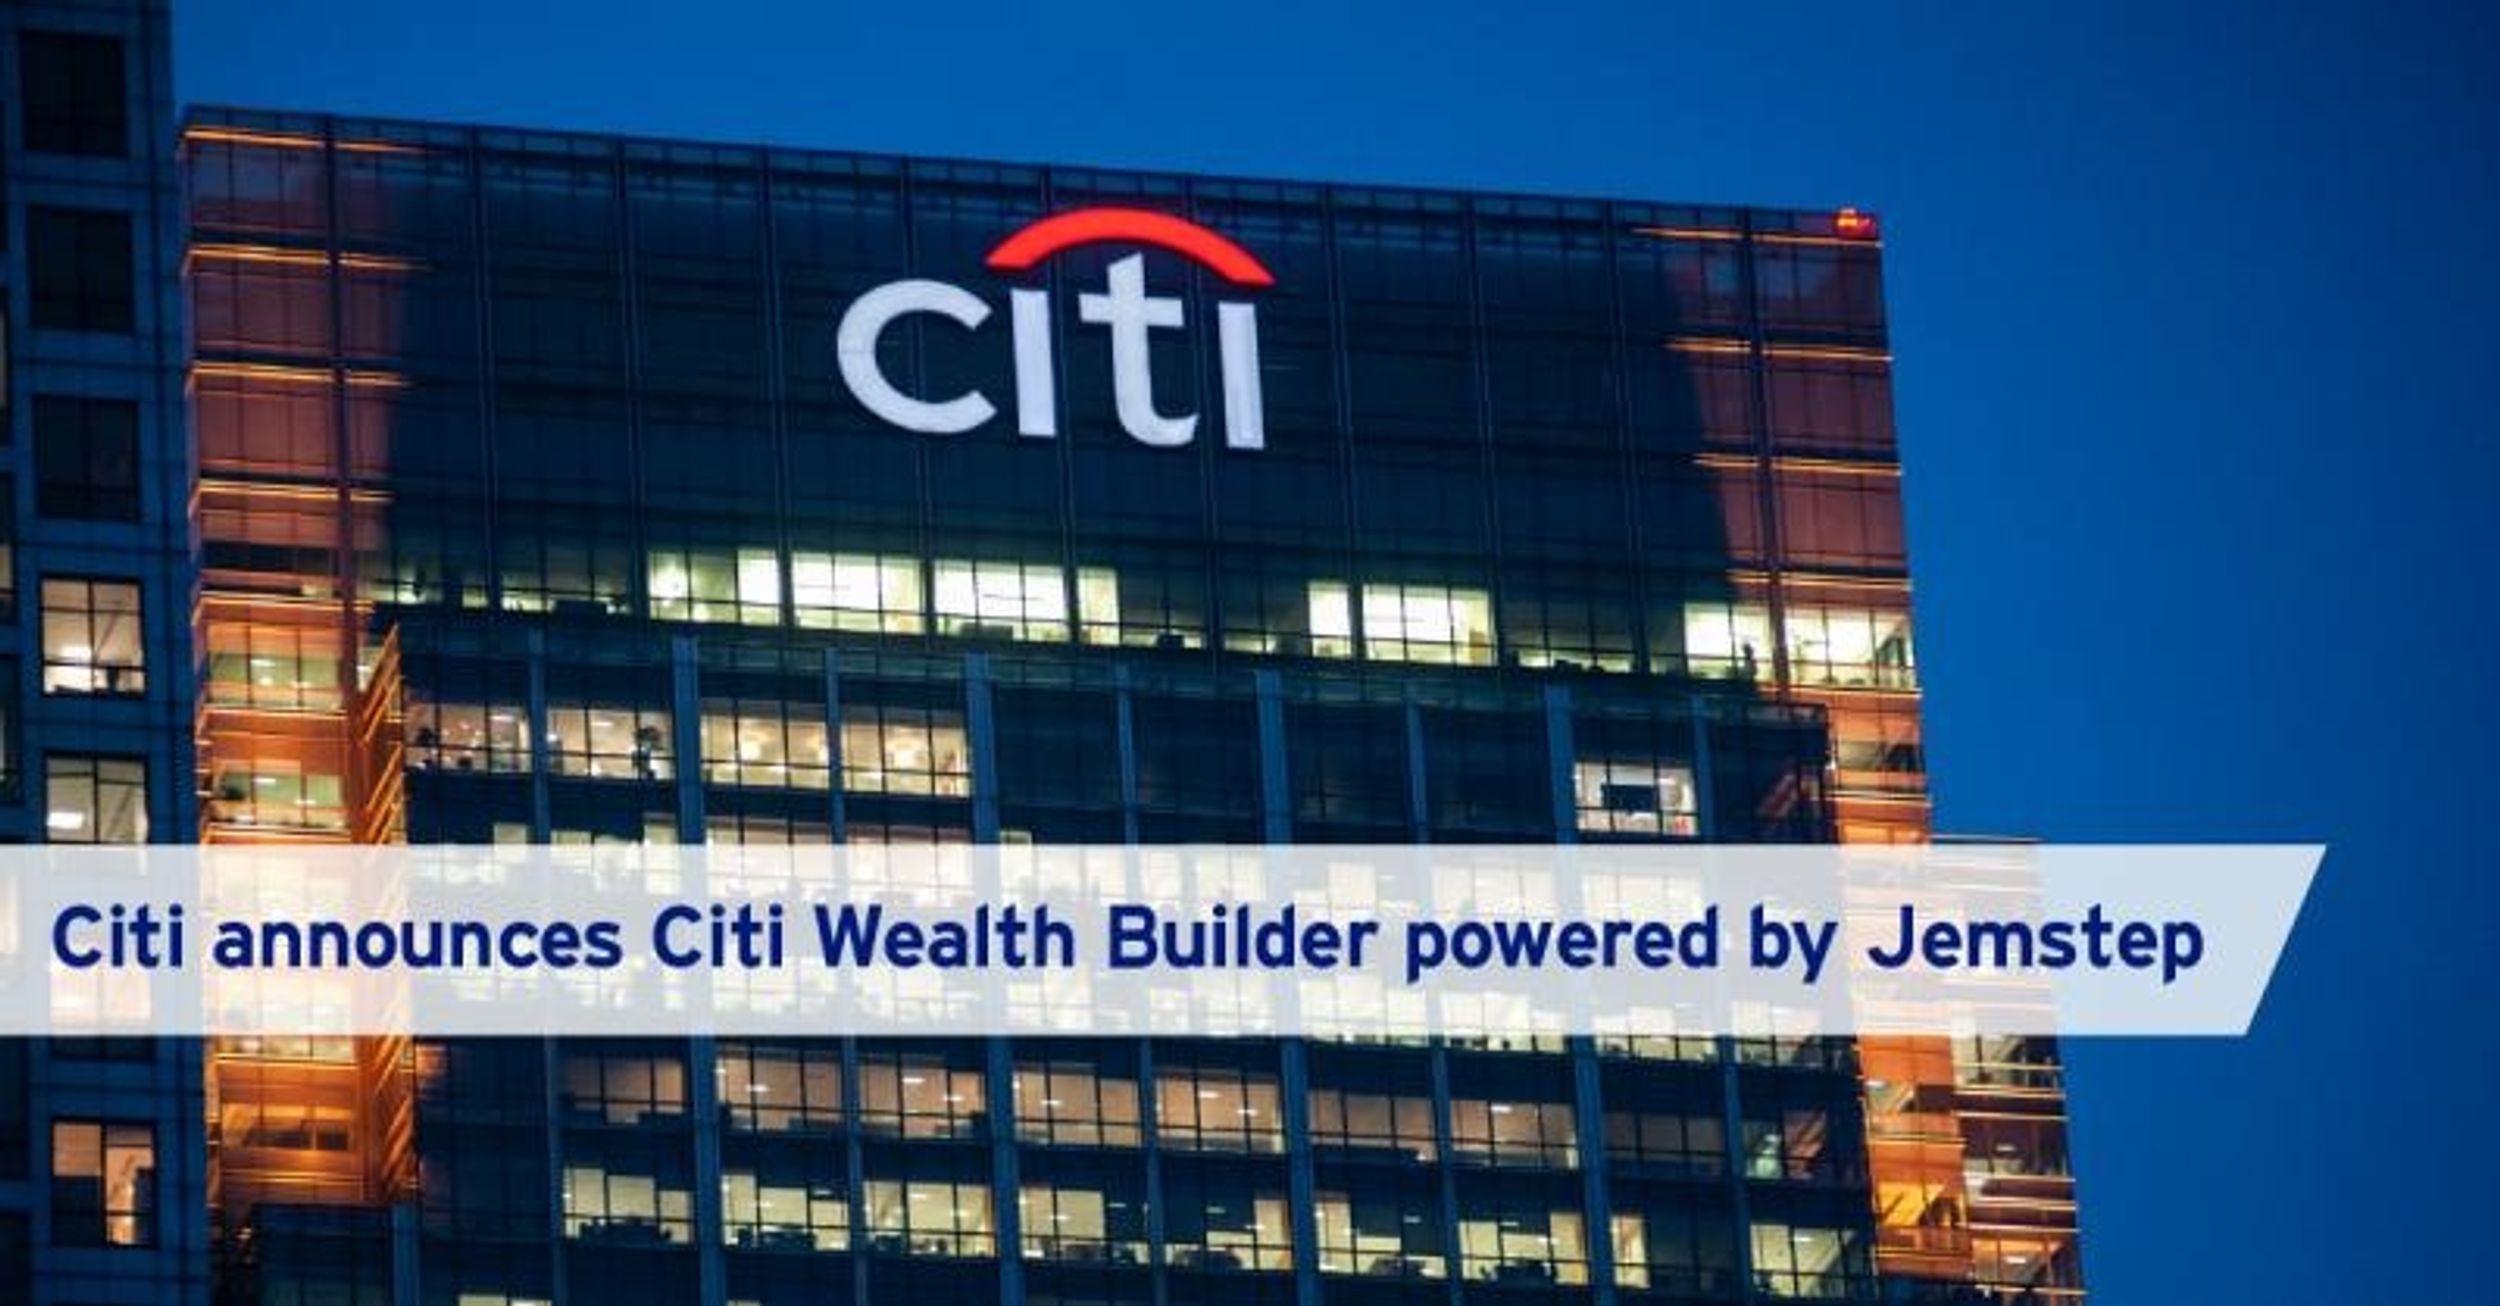 Citi's Newest Digital Platform is Powered by Jemstep